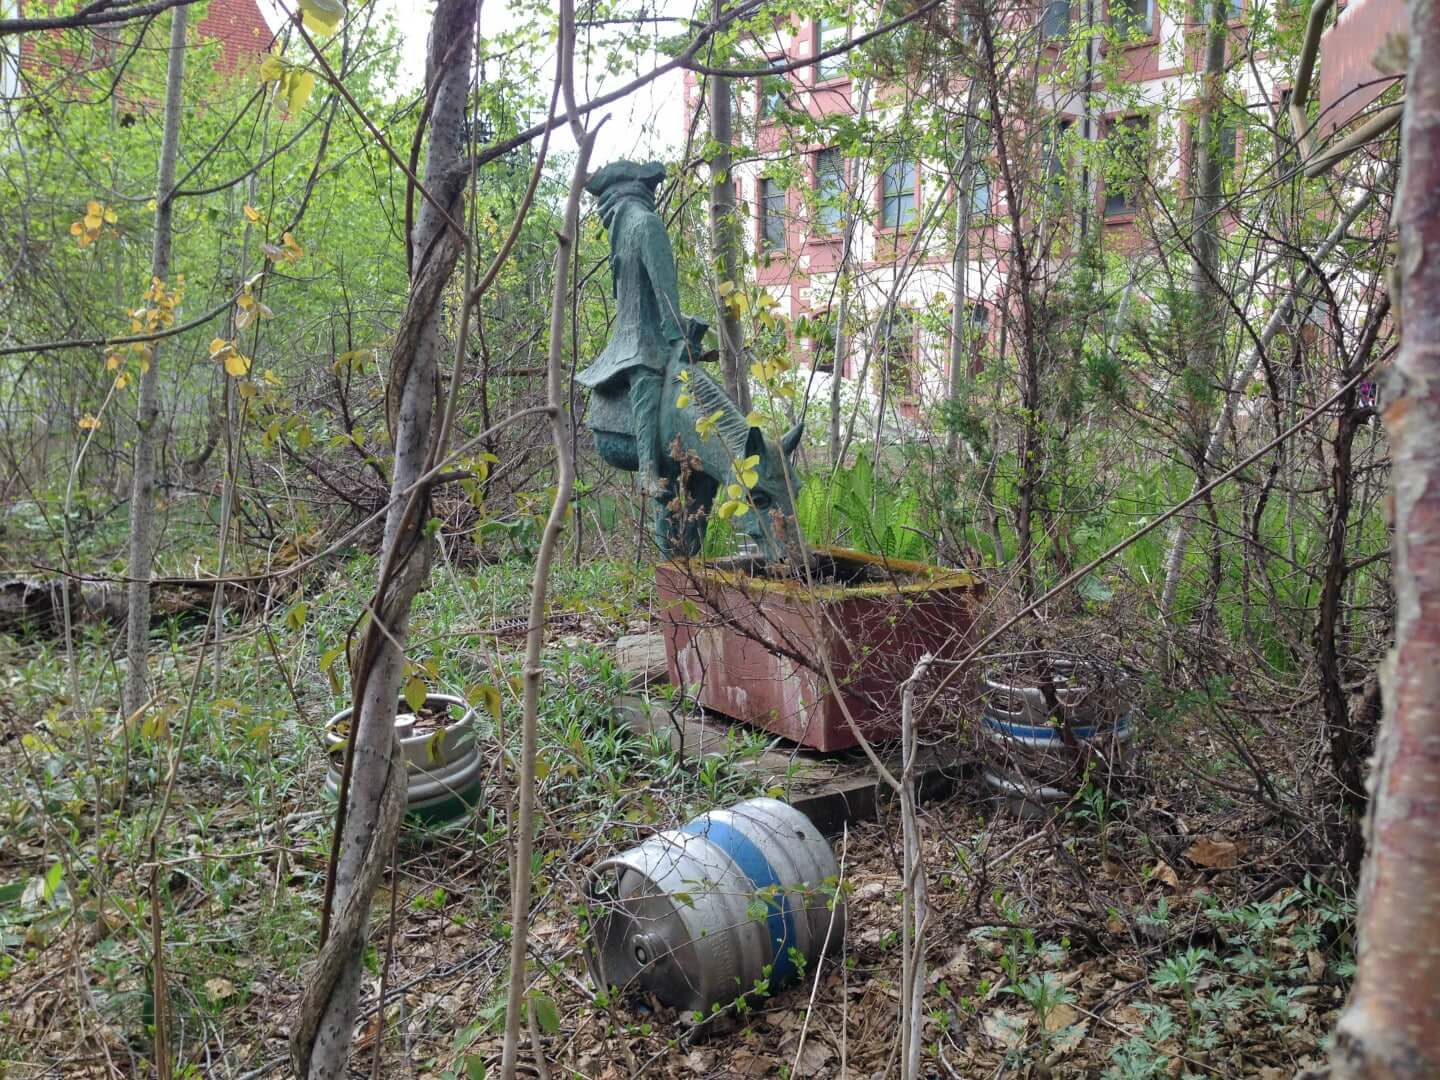 statues and barrels abandoned in the overgrown forest at the gluck kingdom - abandoned german theme park in hokkaido japan